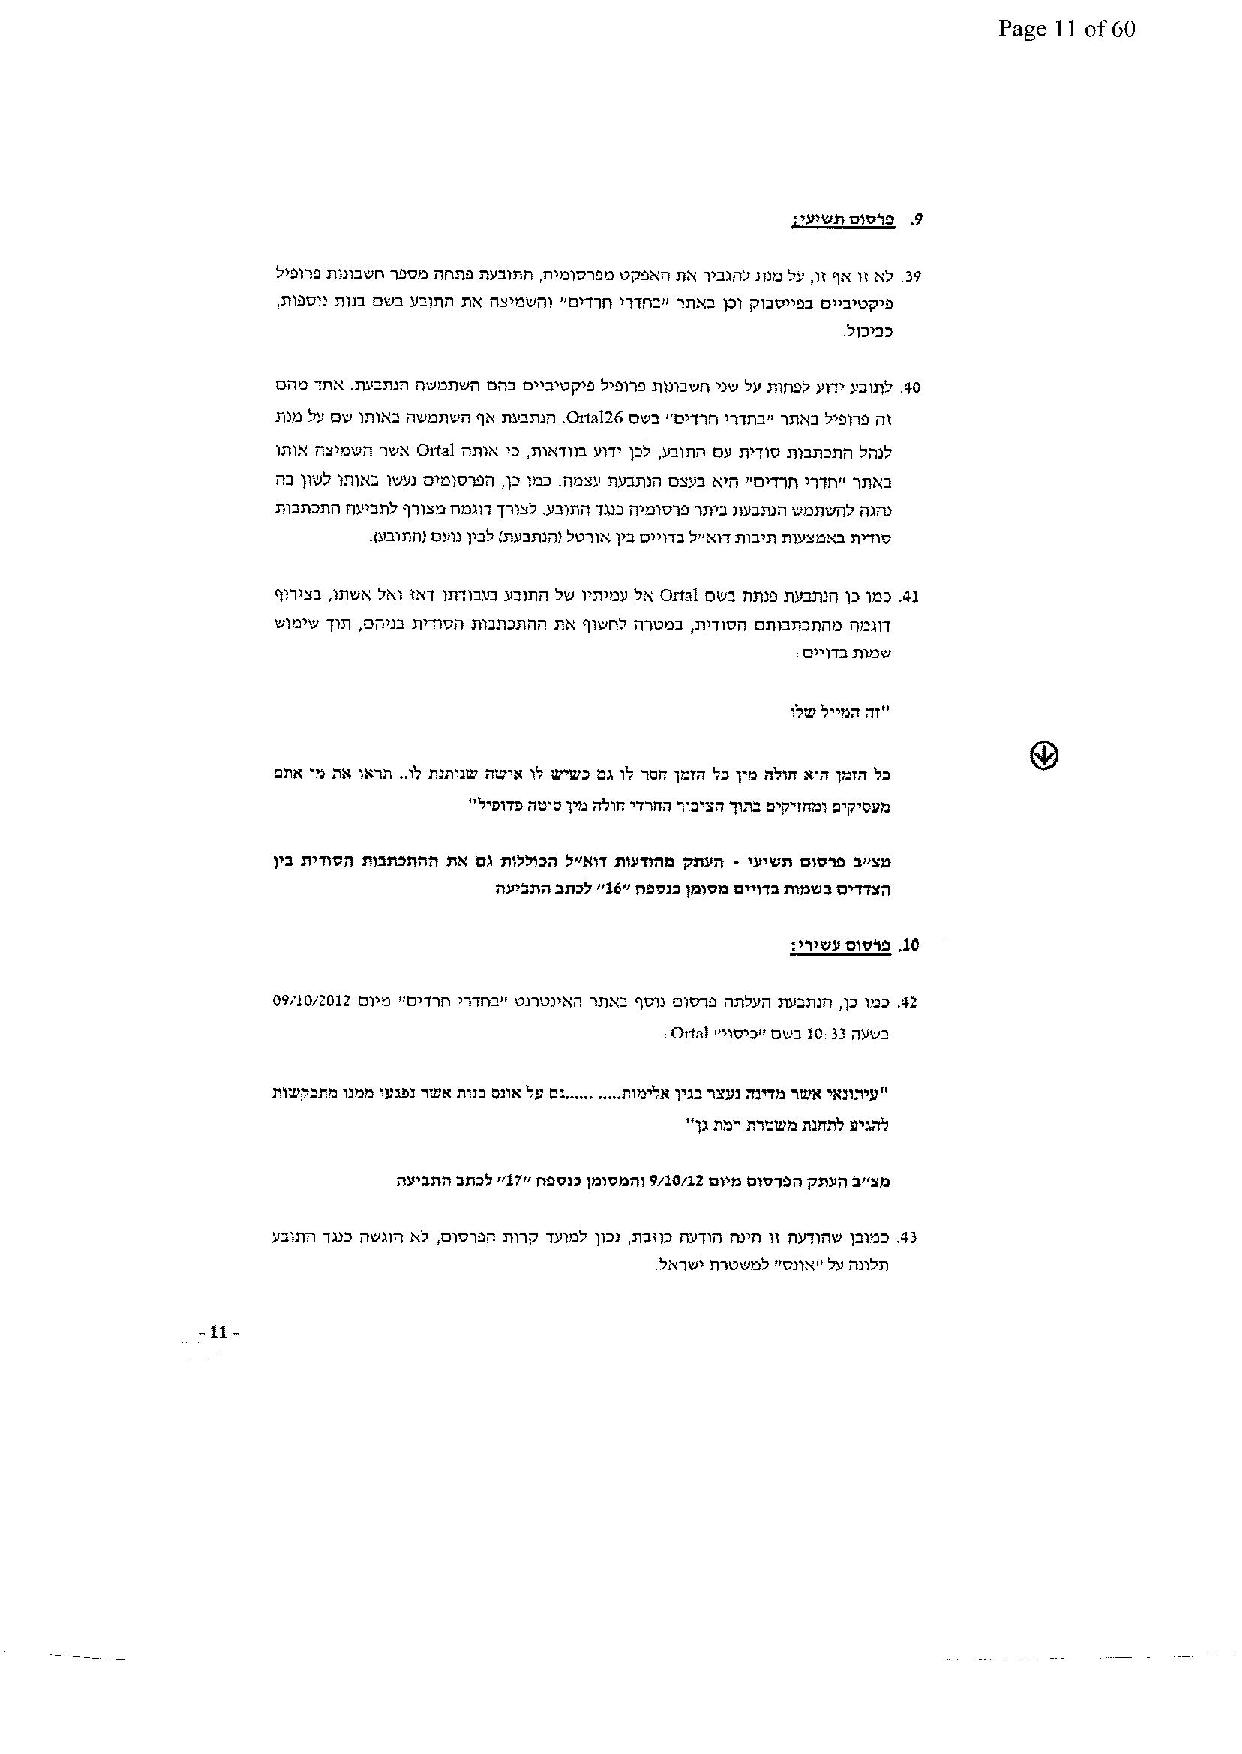 document-page-011